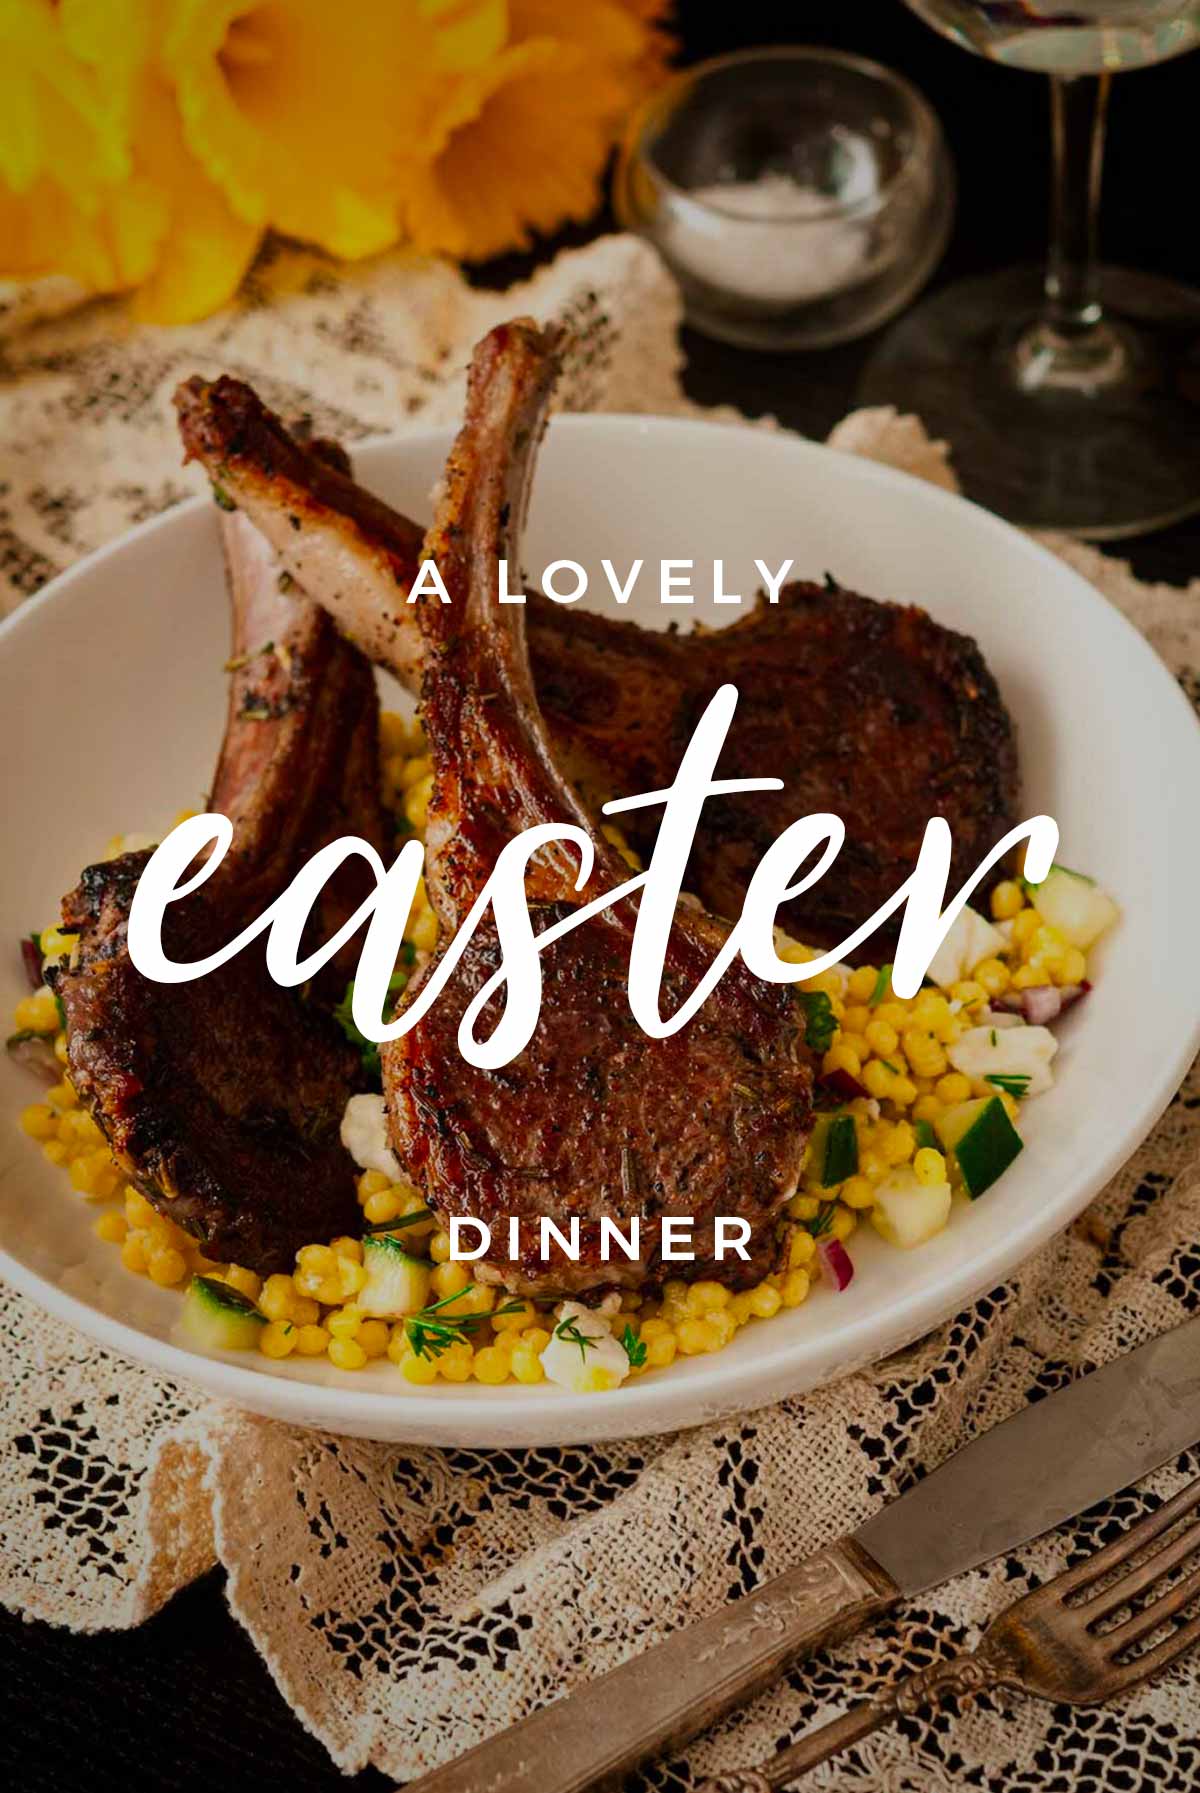 Lamb chops in a bowl with a title that says "A Lovely Easter Dinner."